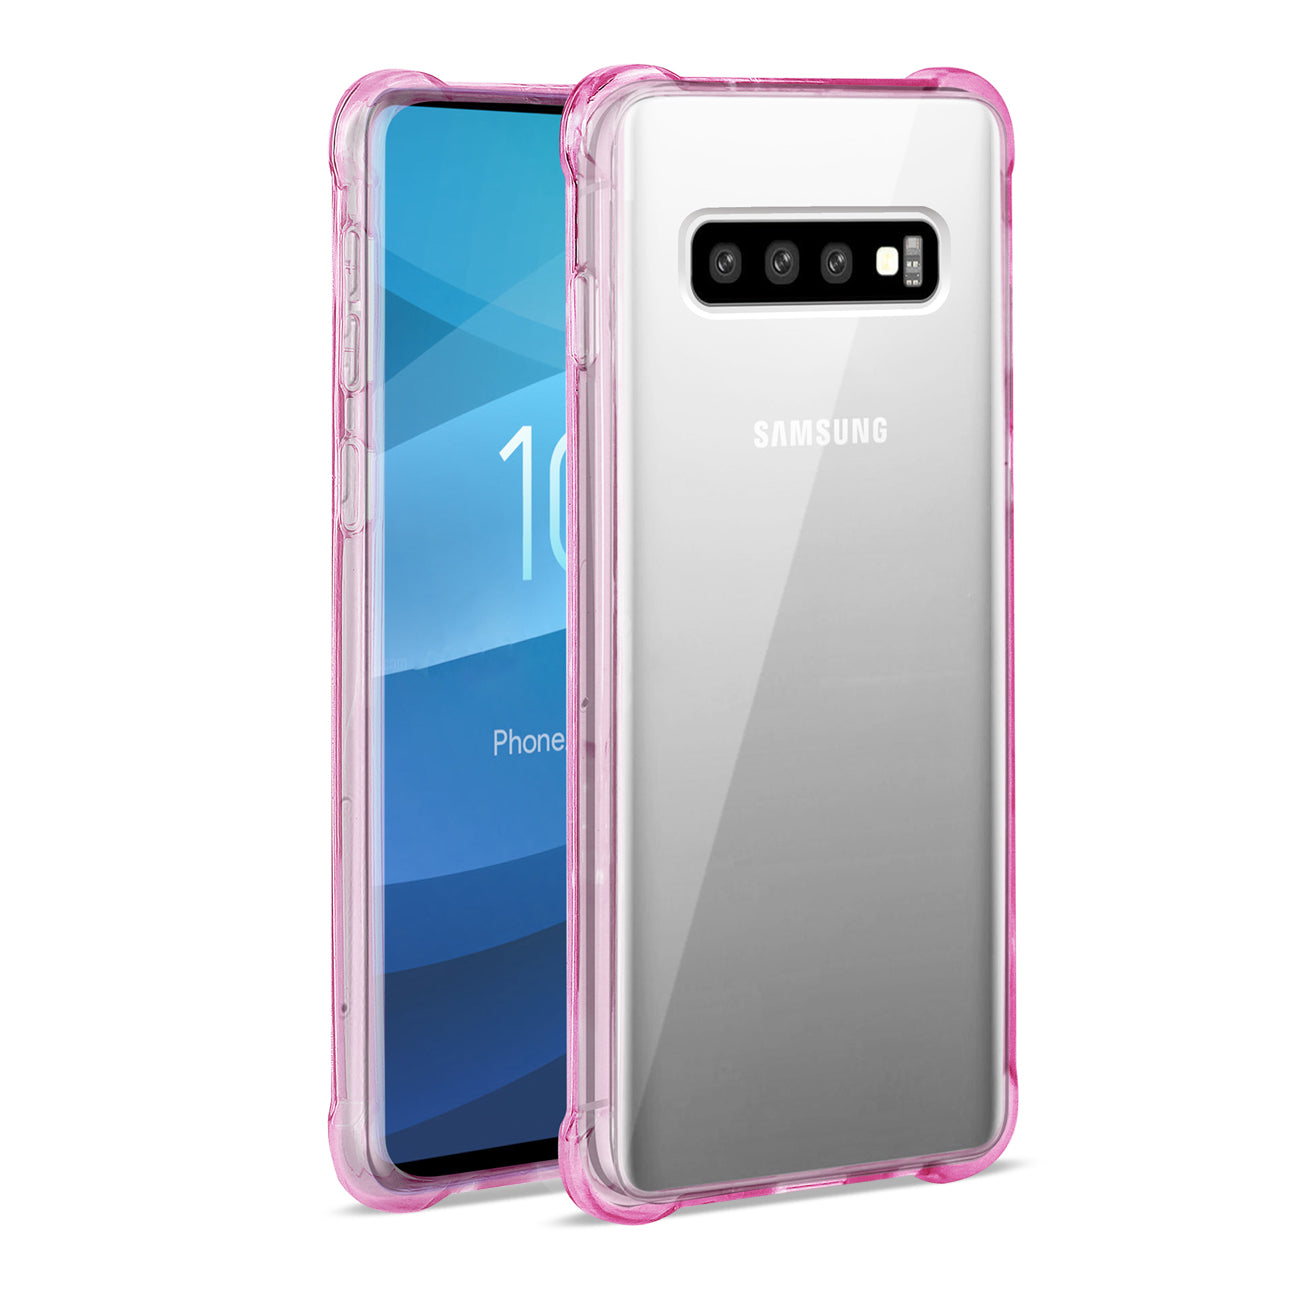 SAMSUNG GALAXY S10 Plus Clear Bumper Case With Air Cushion Protection In Clear Hot Pink